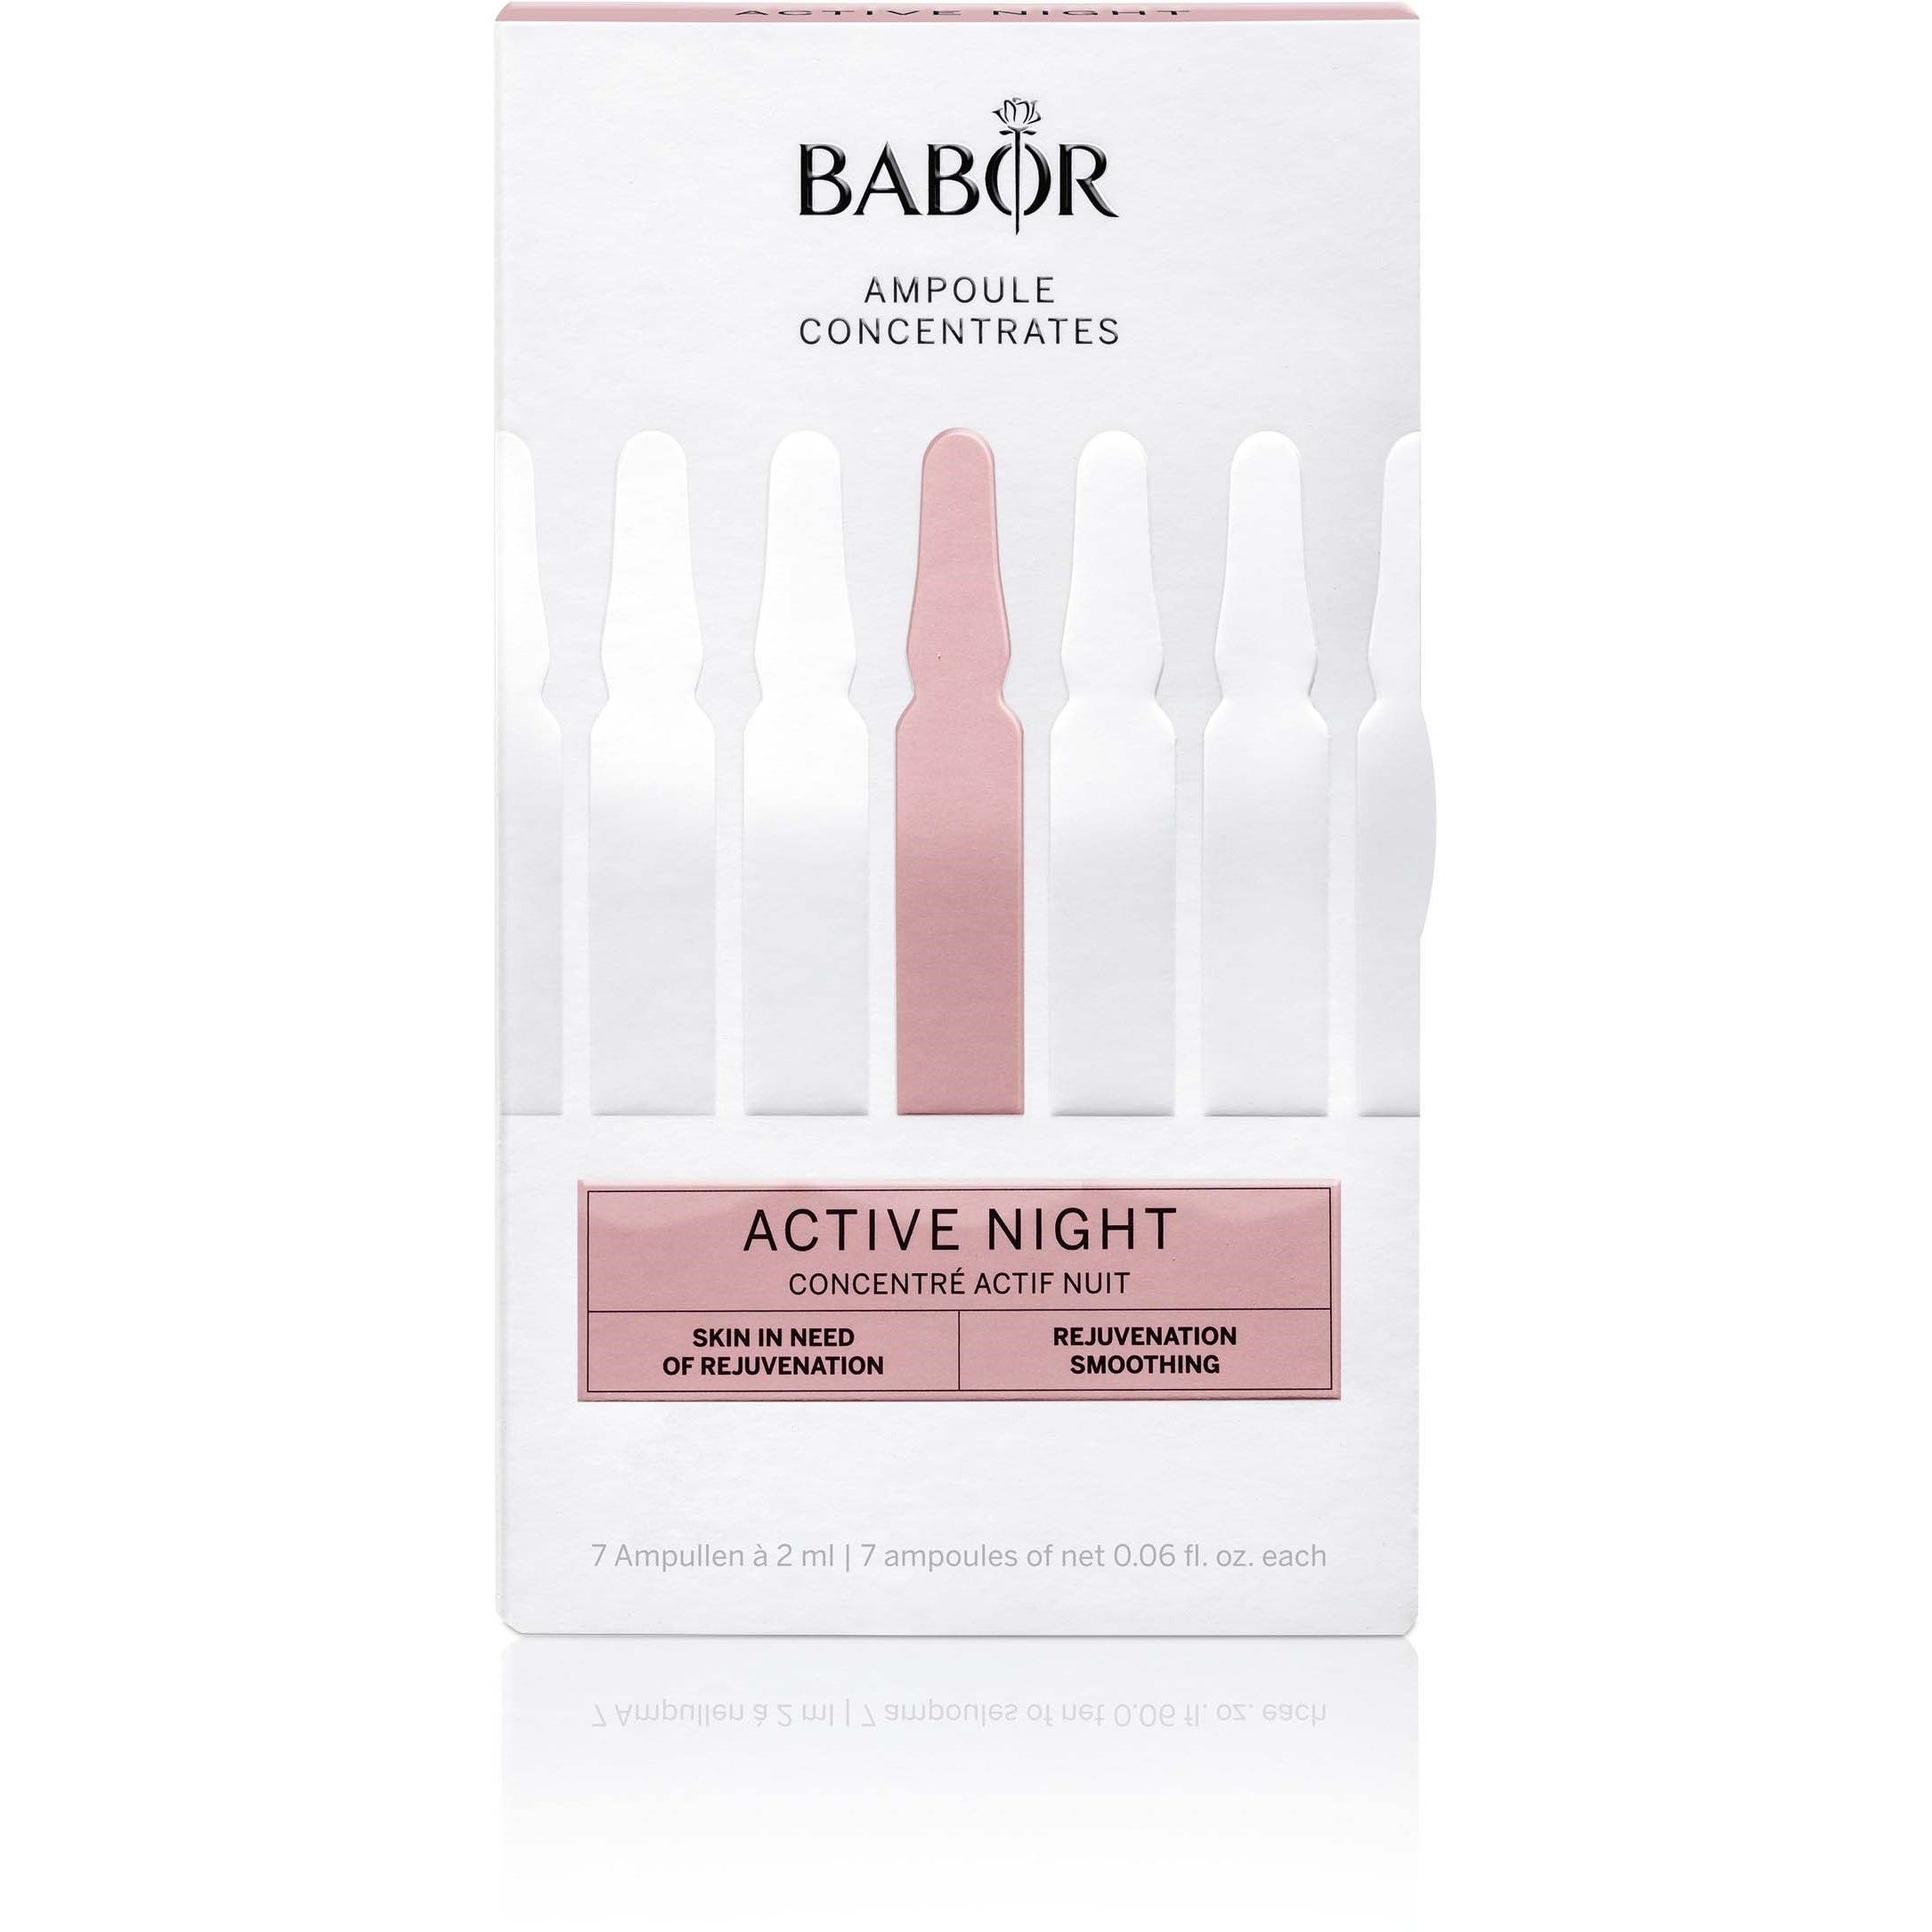 Läs mer om BABOR Ampoule Concentrates Active Night 14 ml